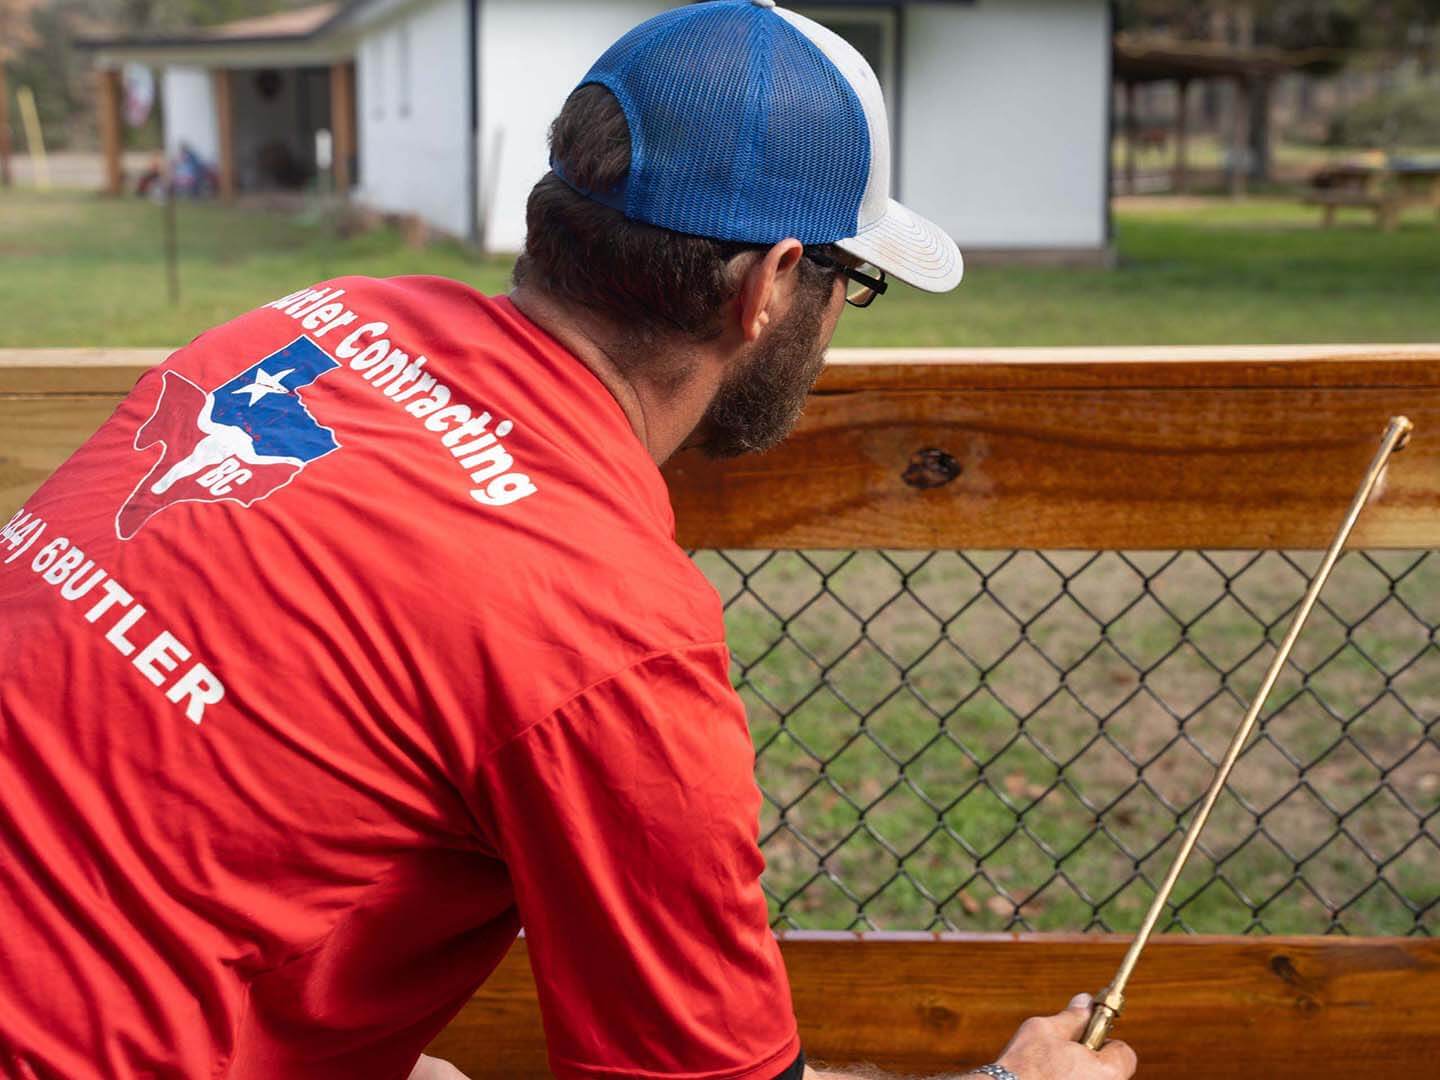 Cleaning and restoration of wood fences, decks, and outdoor structures with stain and seal in Bastrop Texas